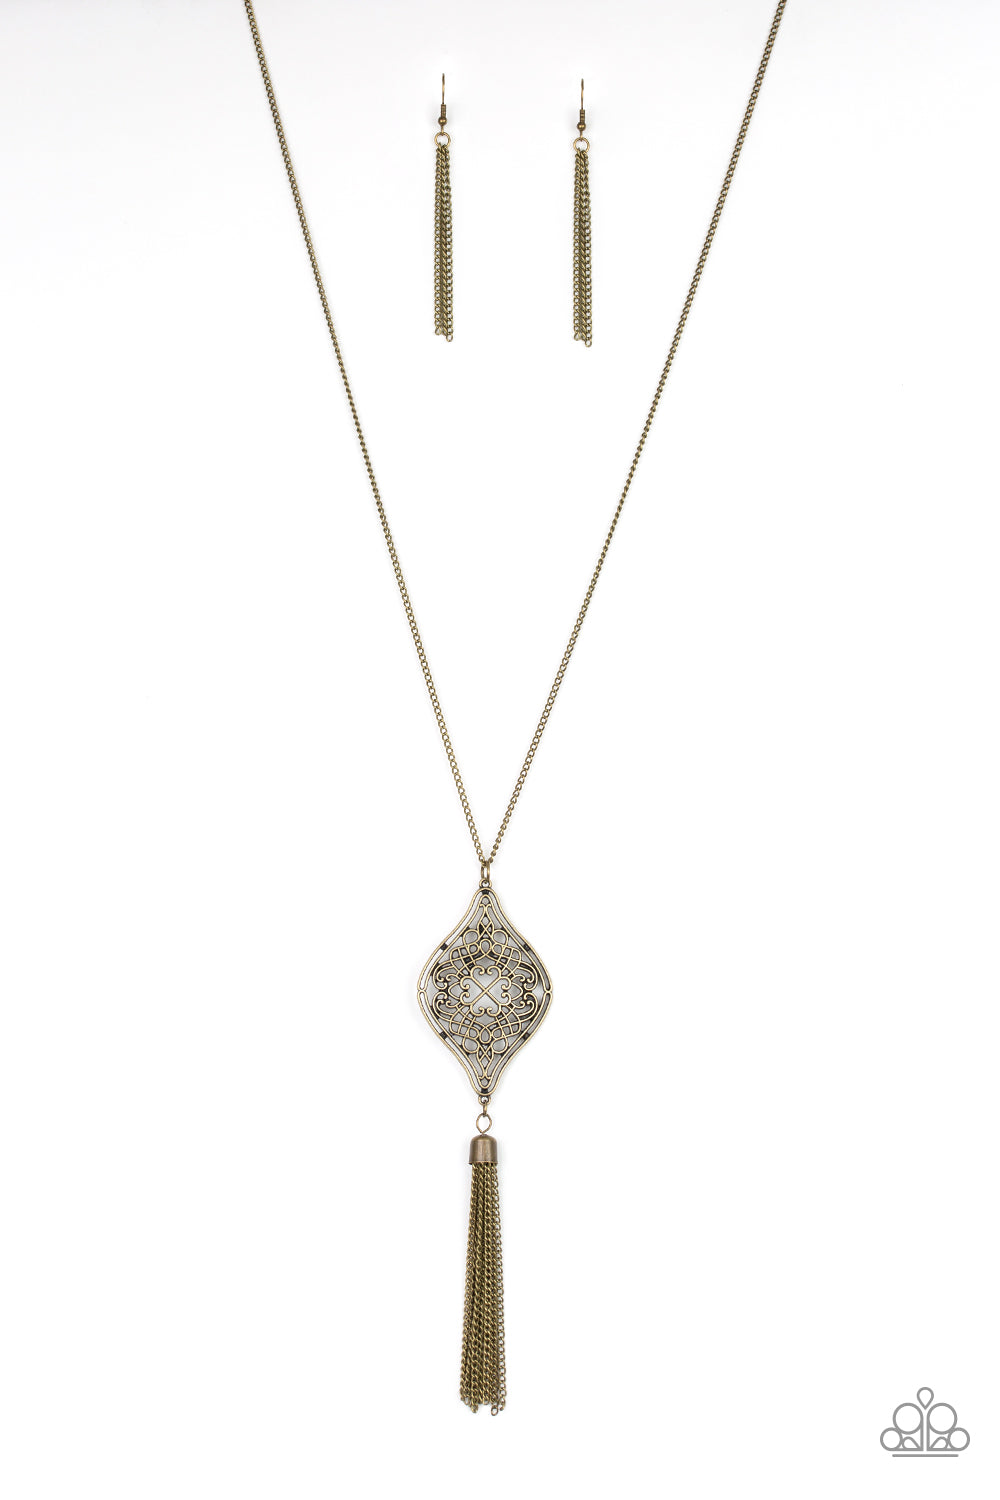 Totally Worth the TASSEL - Brass Necklace - Paparazzi Accessories8